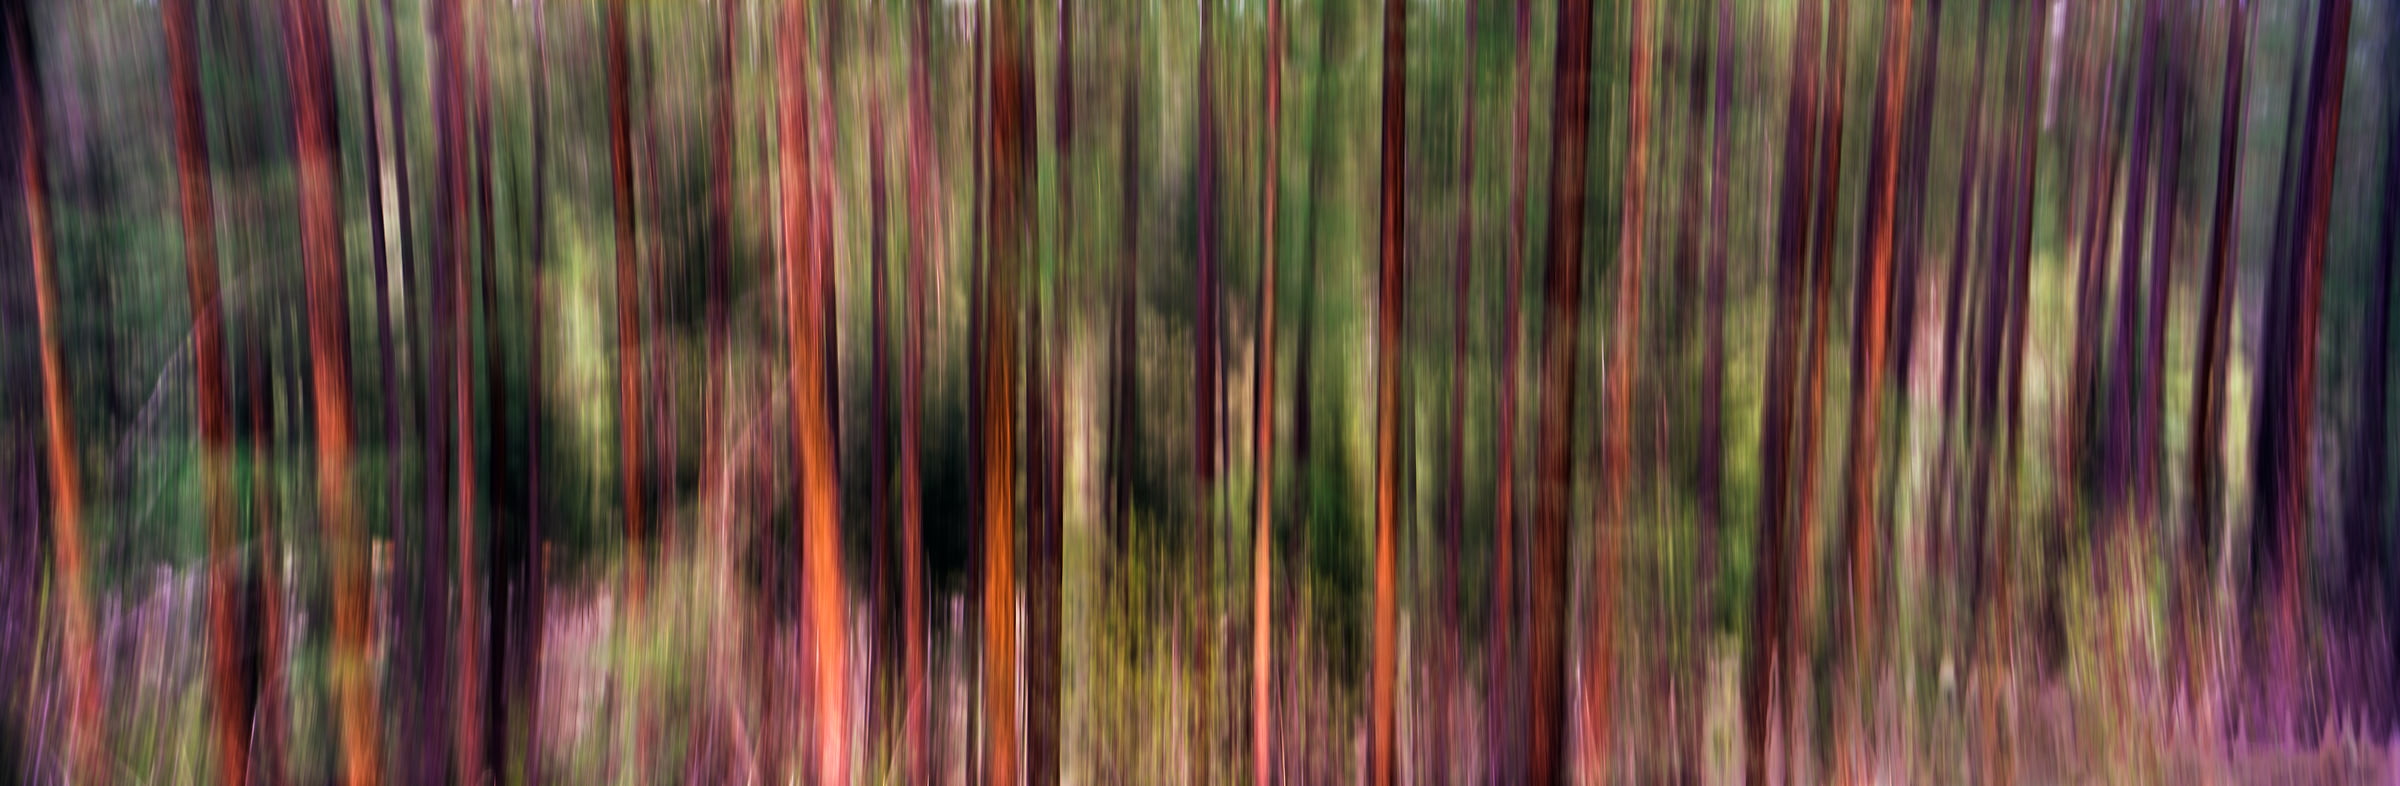 327 megapixels! A very high resolution, large-format, fine art photograph of a forest; abstract photograph created by Scott Dimond in Kimberley, British Columbia, Canada.